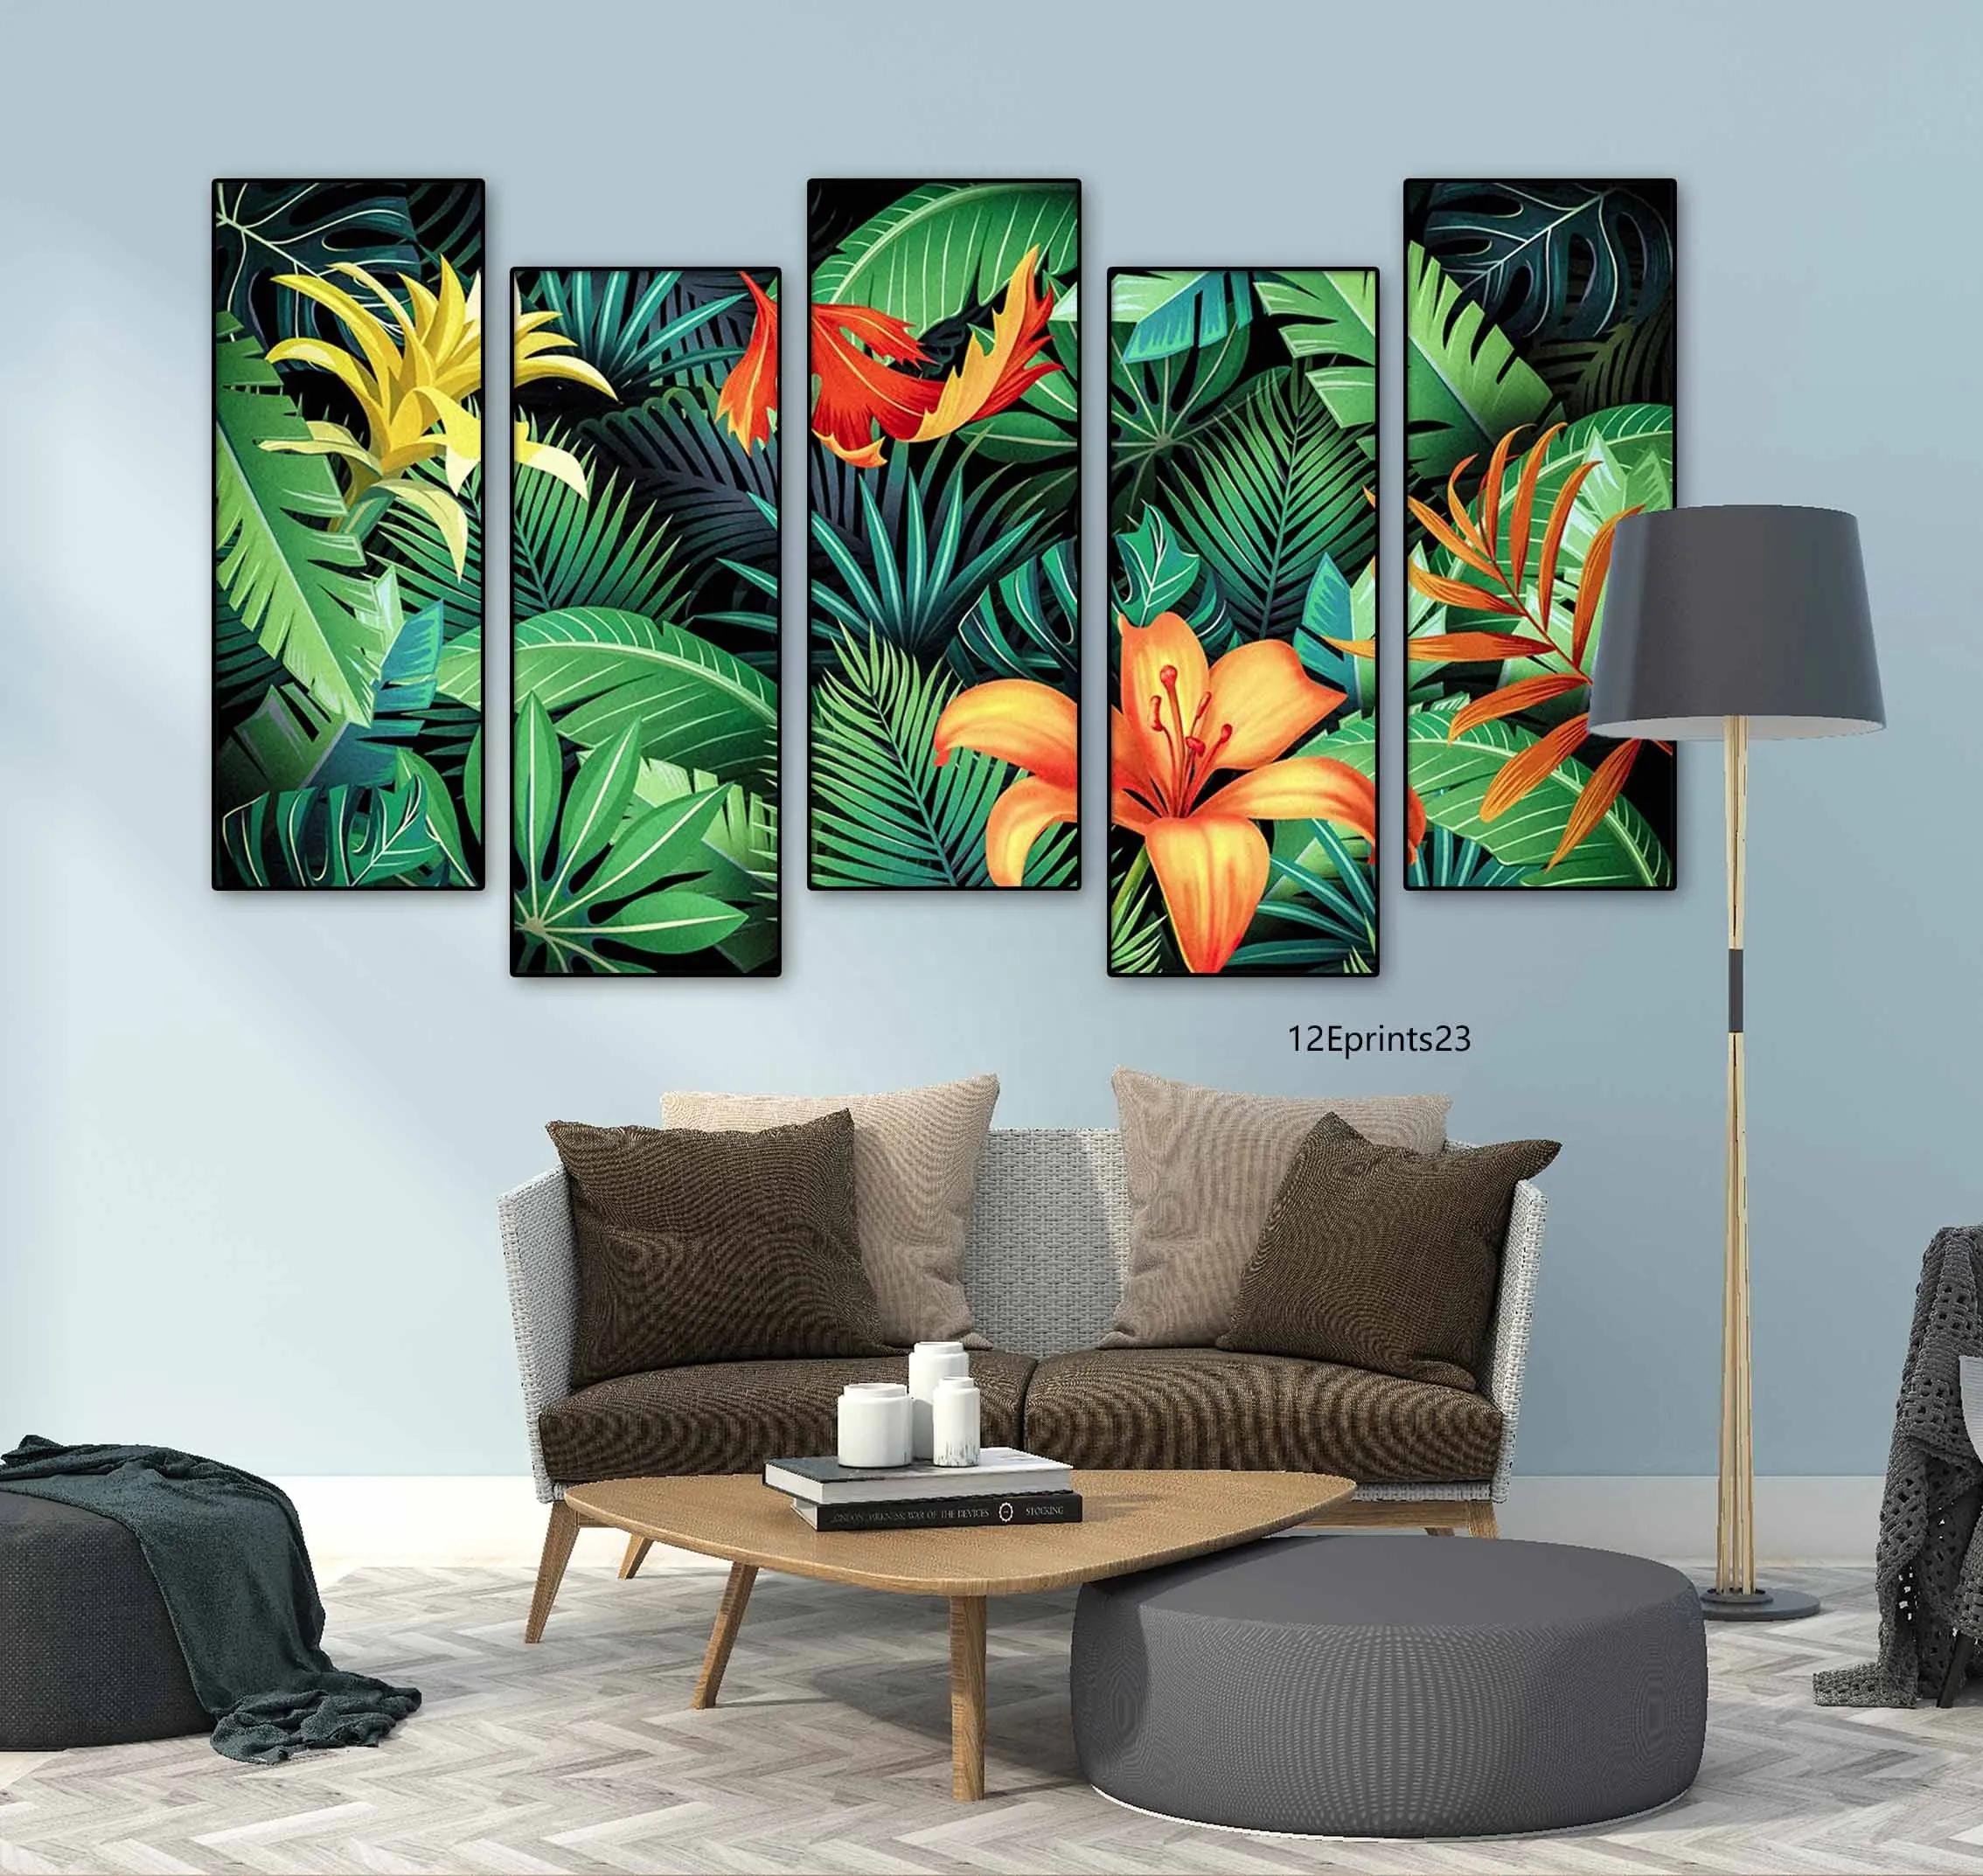 Print Wall Art Customize Modern 5 Panel Couple Wall Art Canvas Tropical Leaves Paintings Printing Decoration On Artworks For Hotel Project